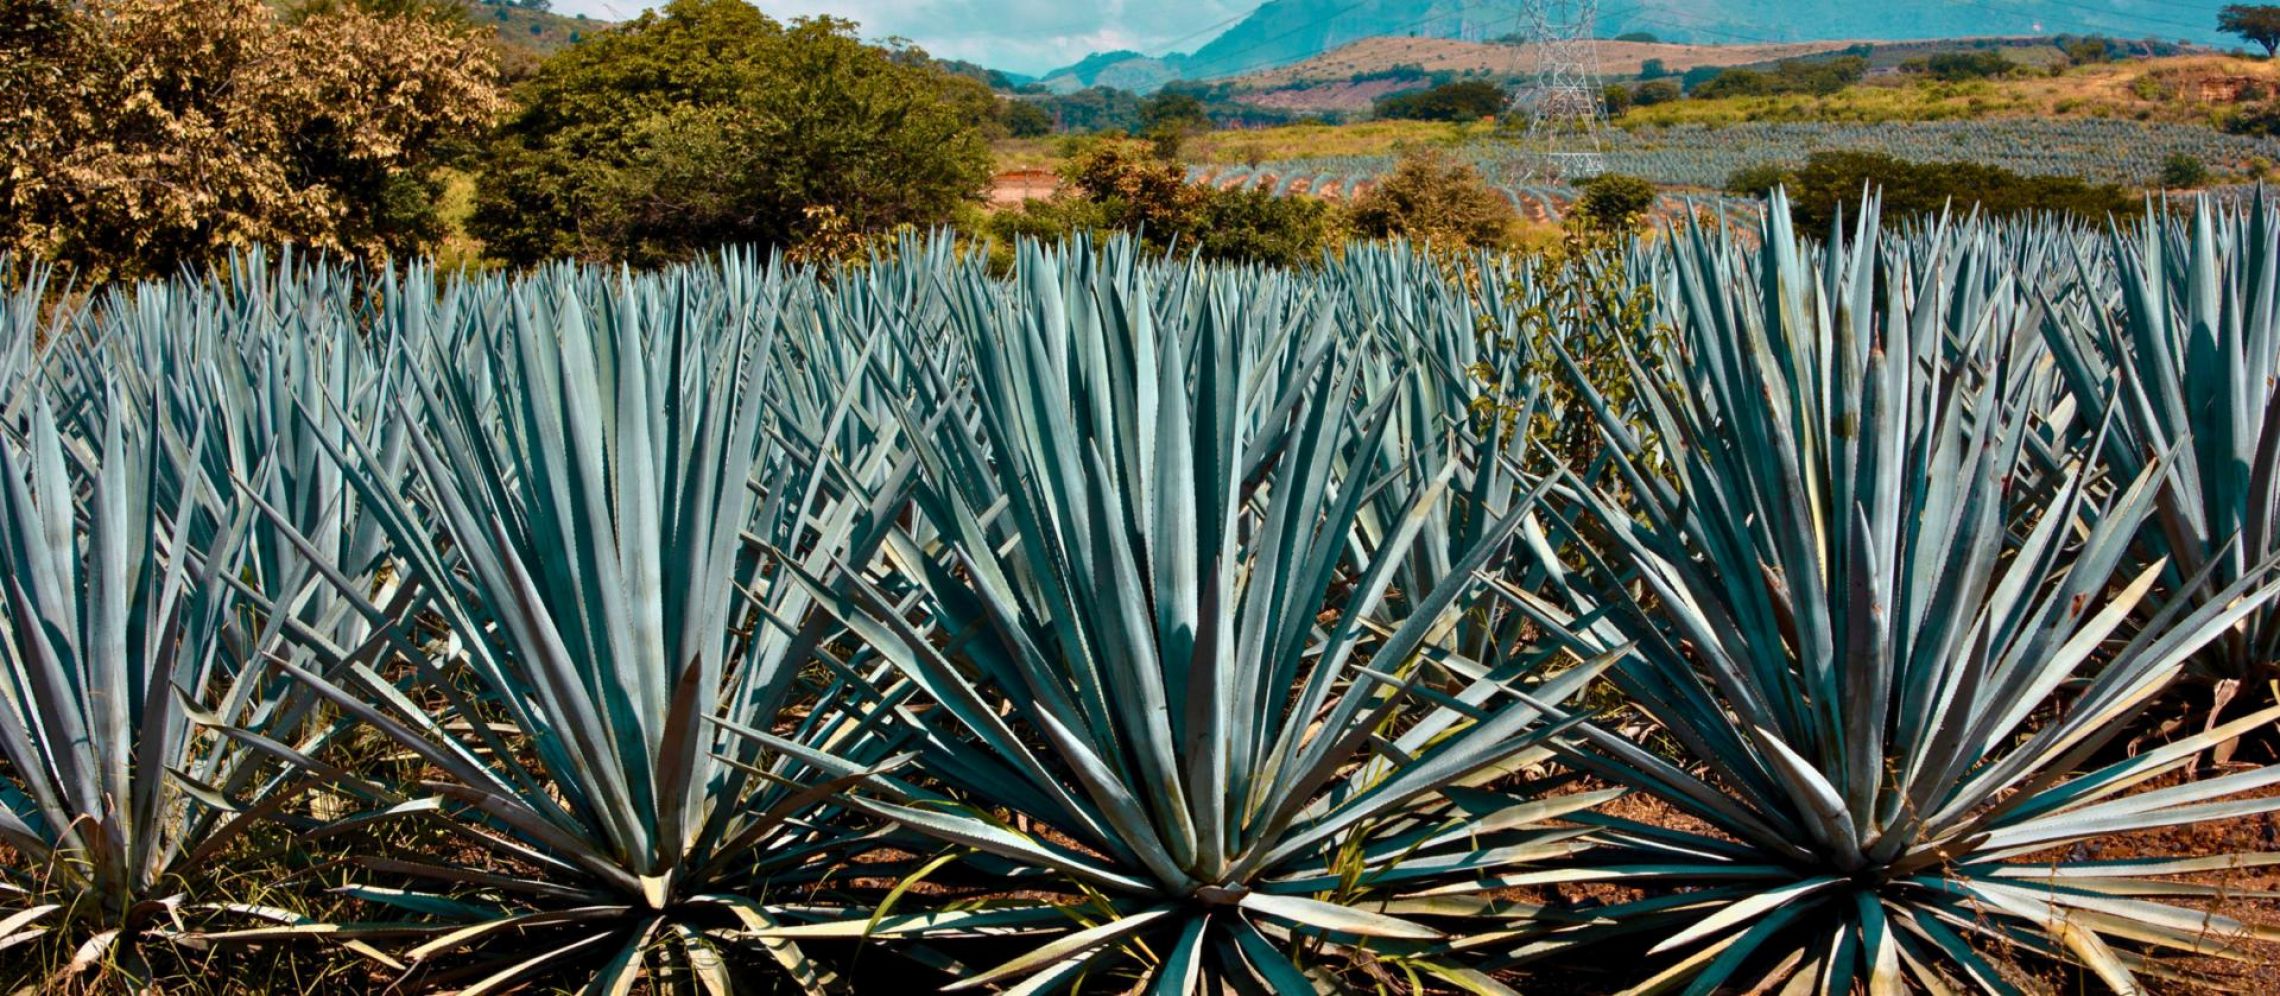 Photo for: Navigating the Rise of Agave Spirits